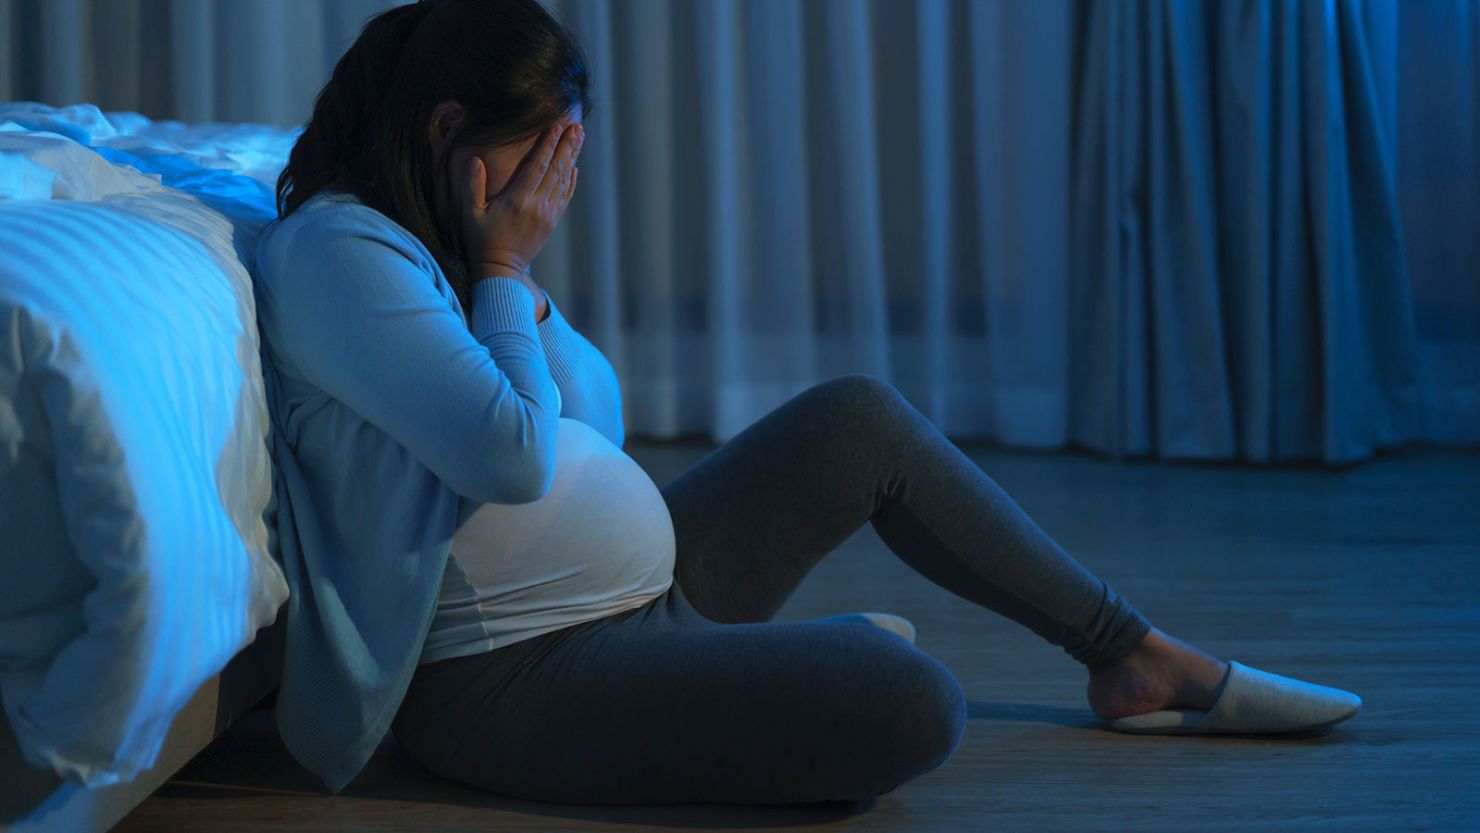 Maternal mental health disorders such as suicide and opioid overdose are responsible for nearly 1 in 4 maternal deaths in the US, research shows.